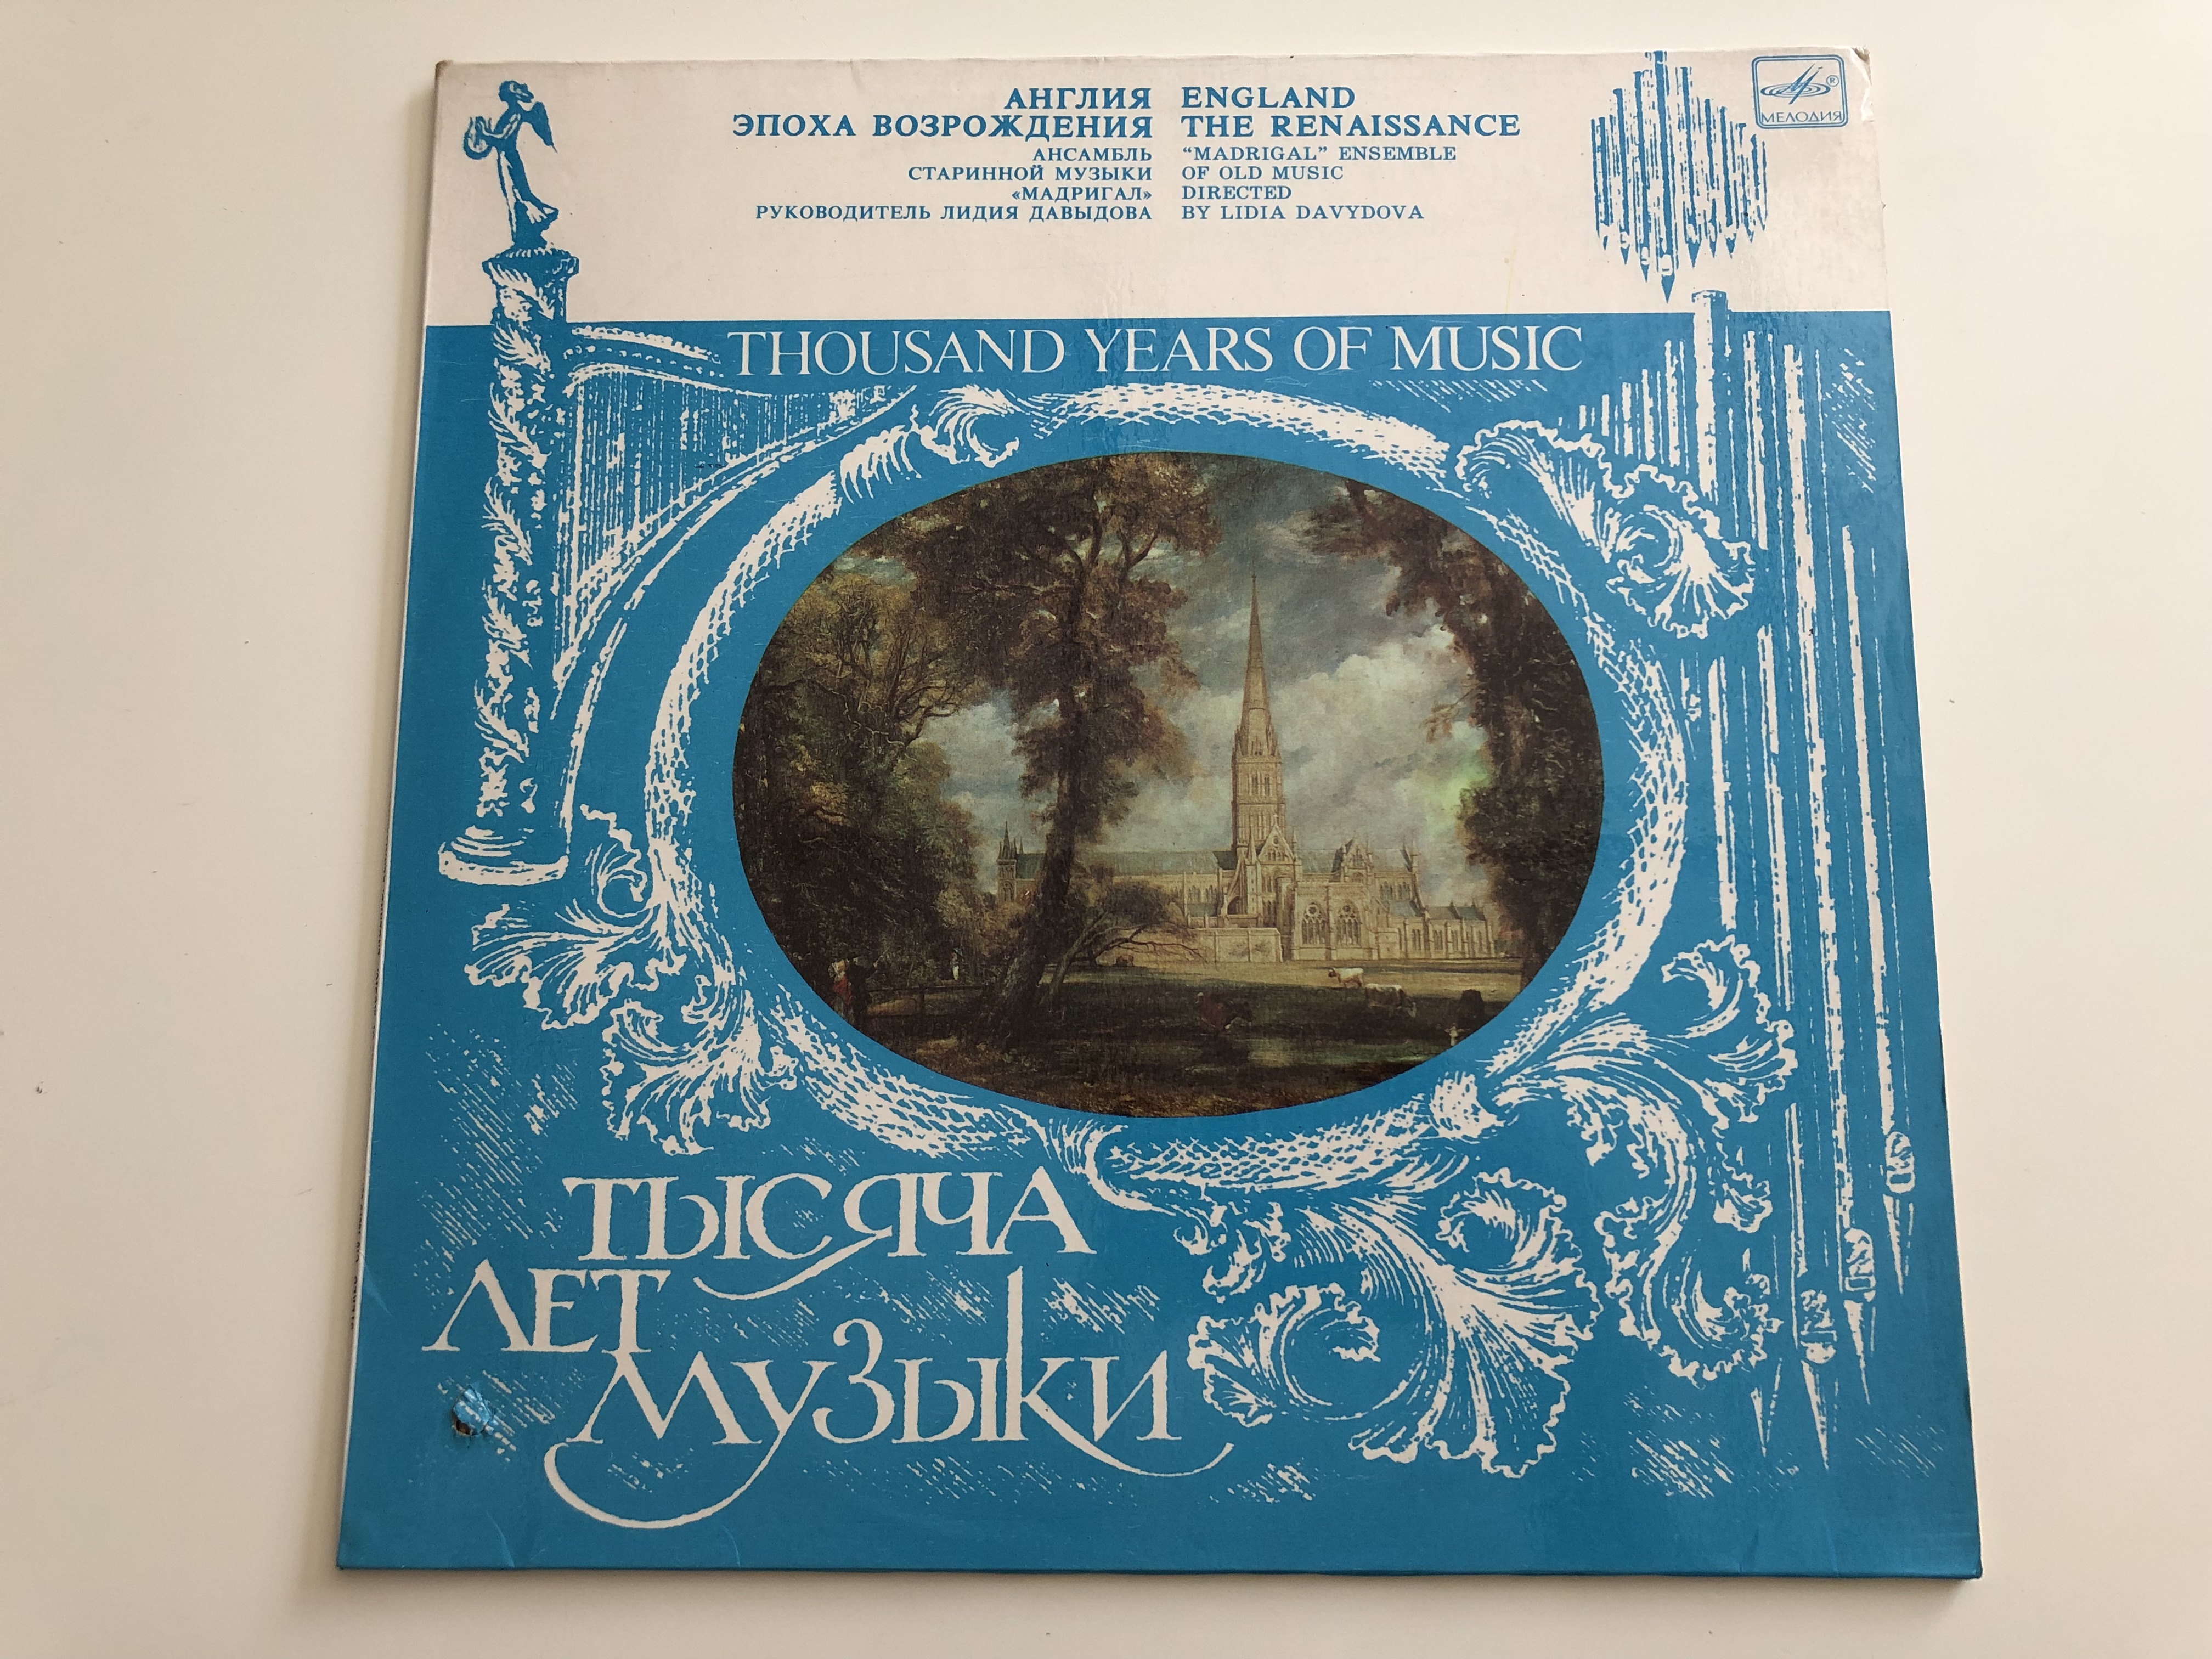 england-the-renaissance-thousand-years-of-music-madrigal-ensemble-of-old-music-lidia-davydova-lp-stereo-c10-16675-007-1-.jpg